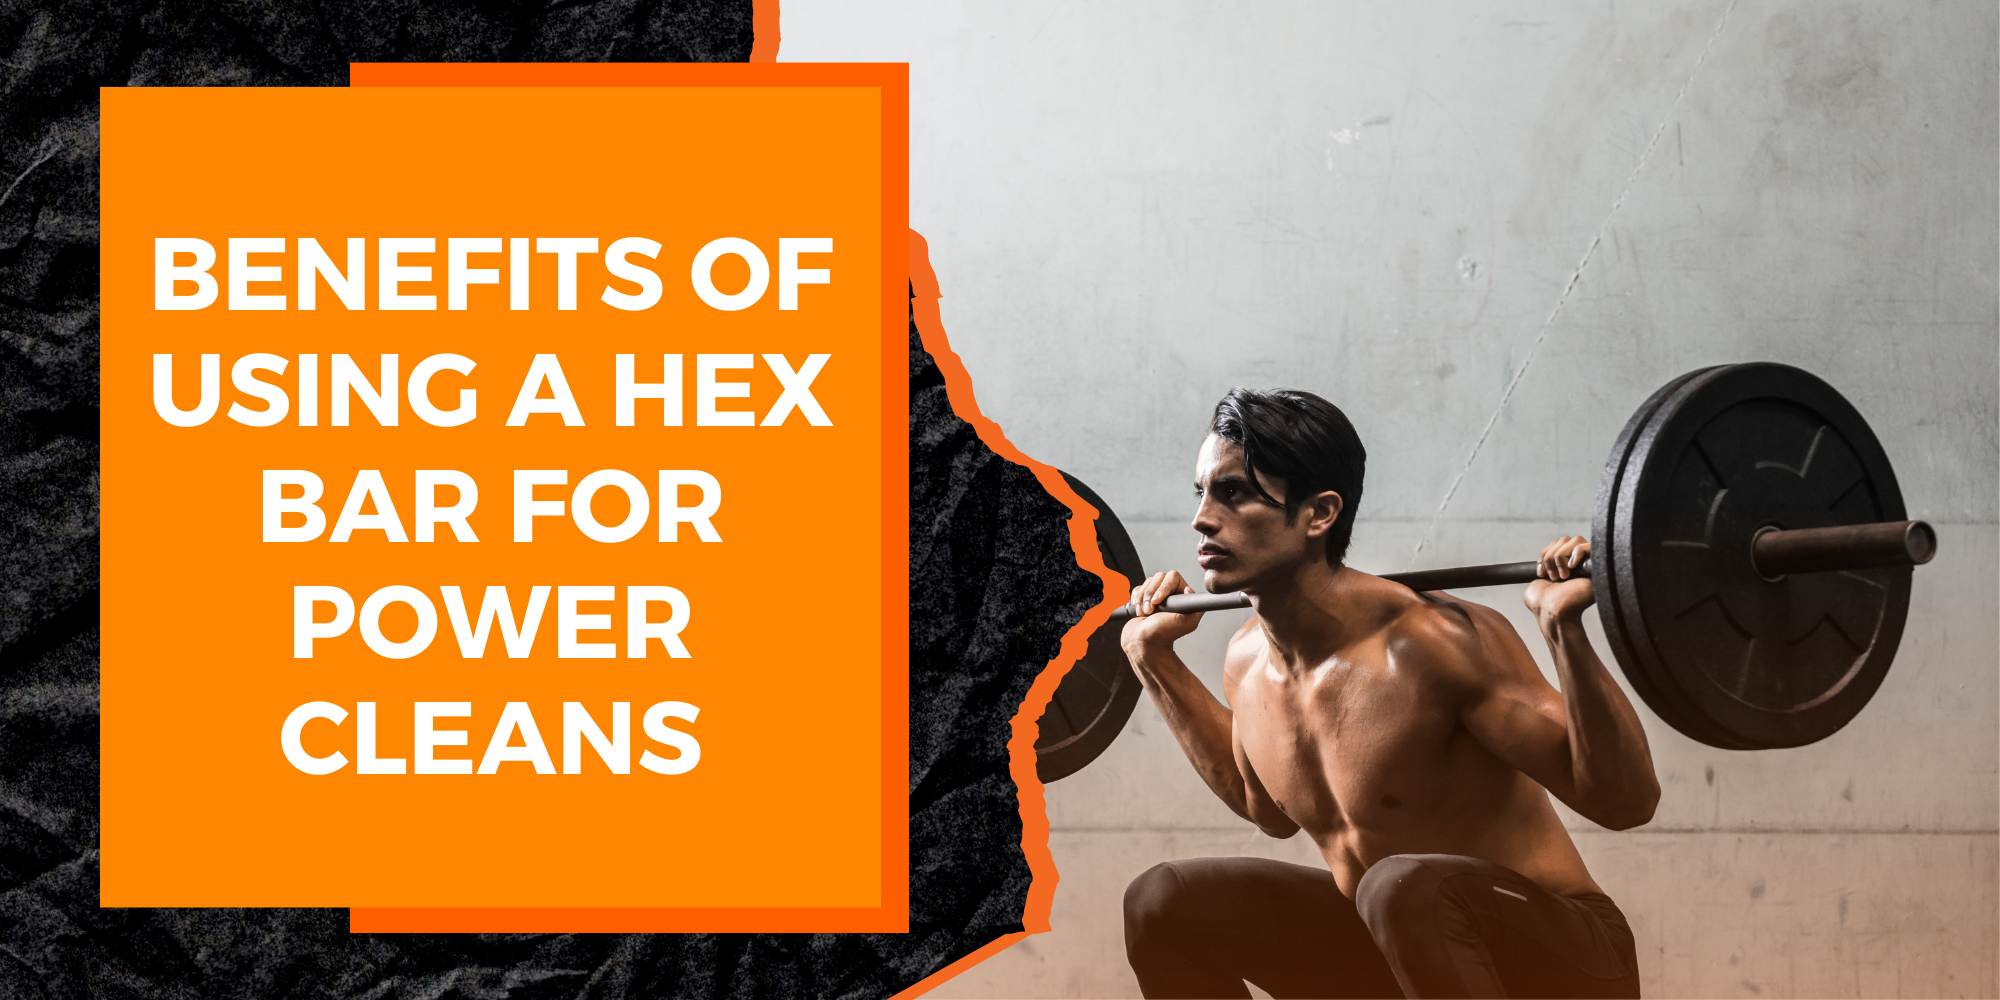 The Benefits of Using a Hex Bar for Power Cleans